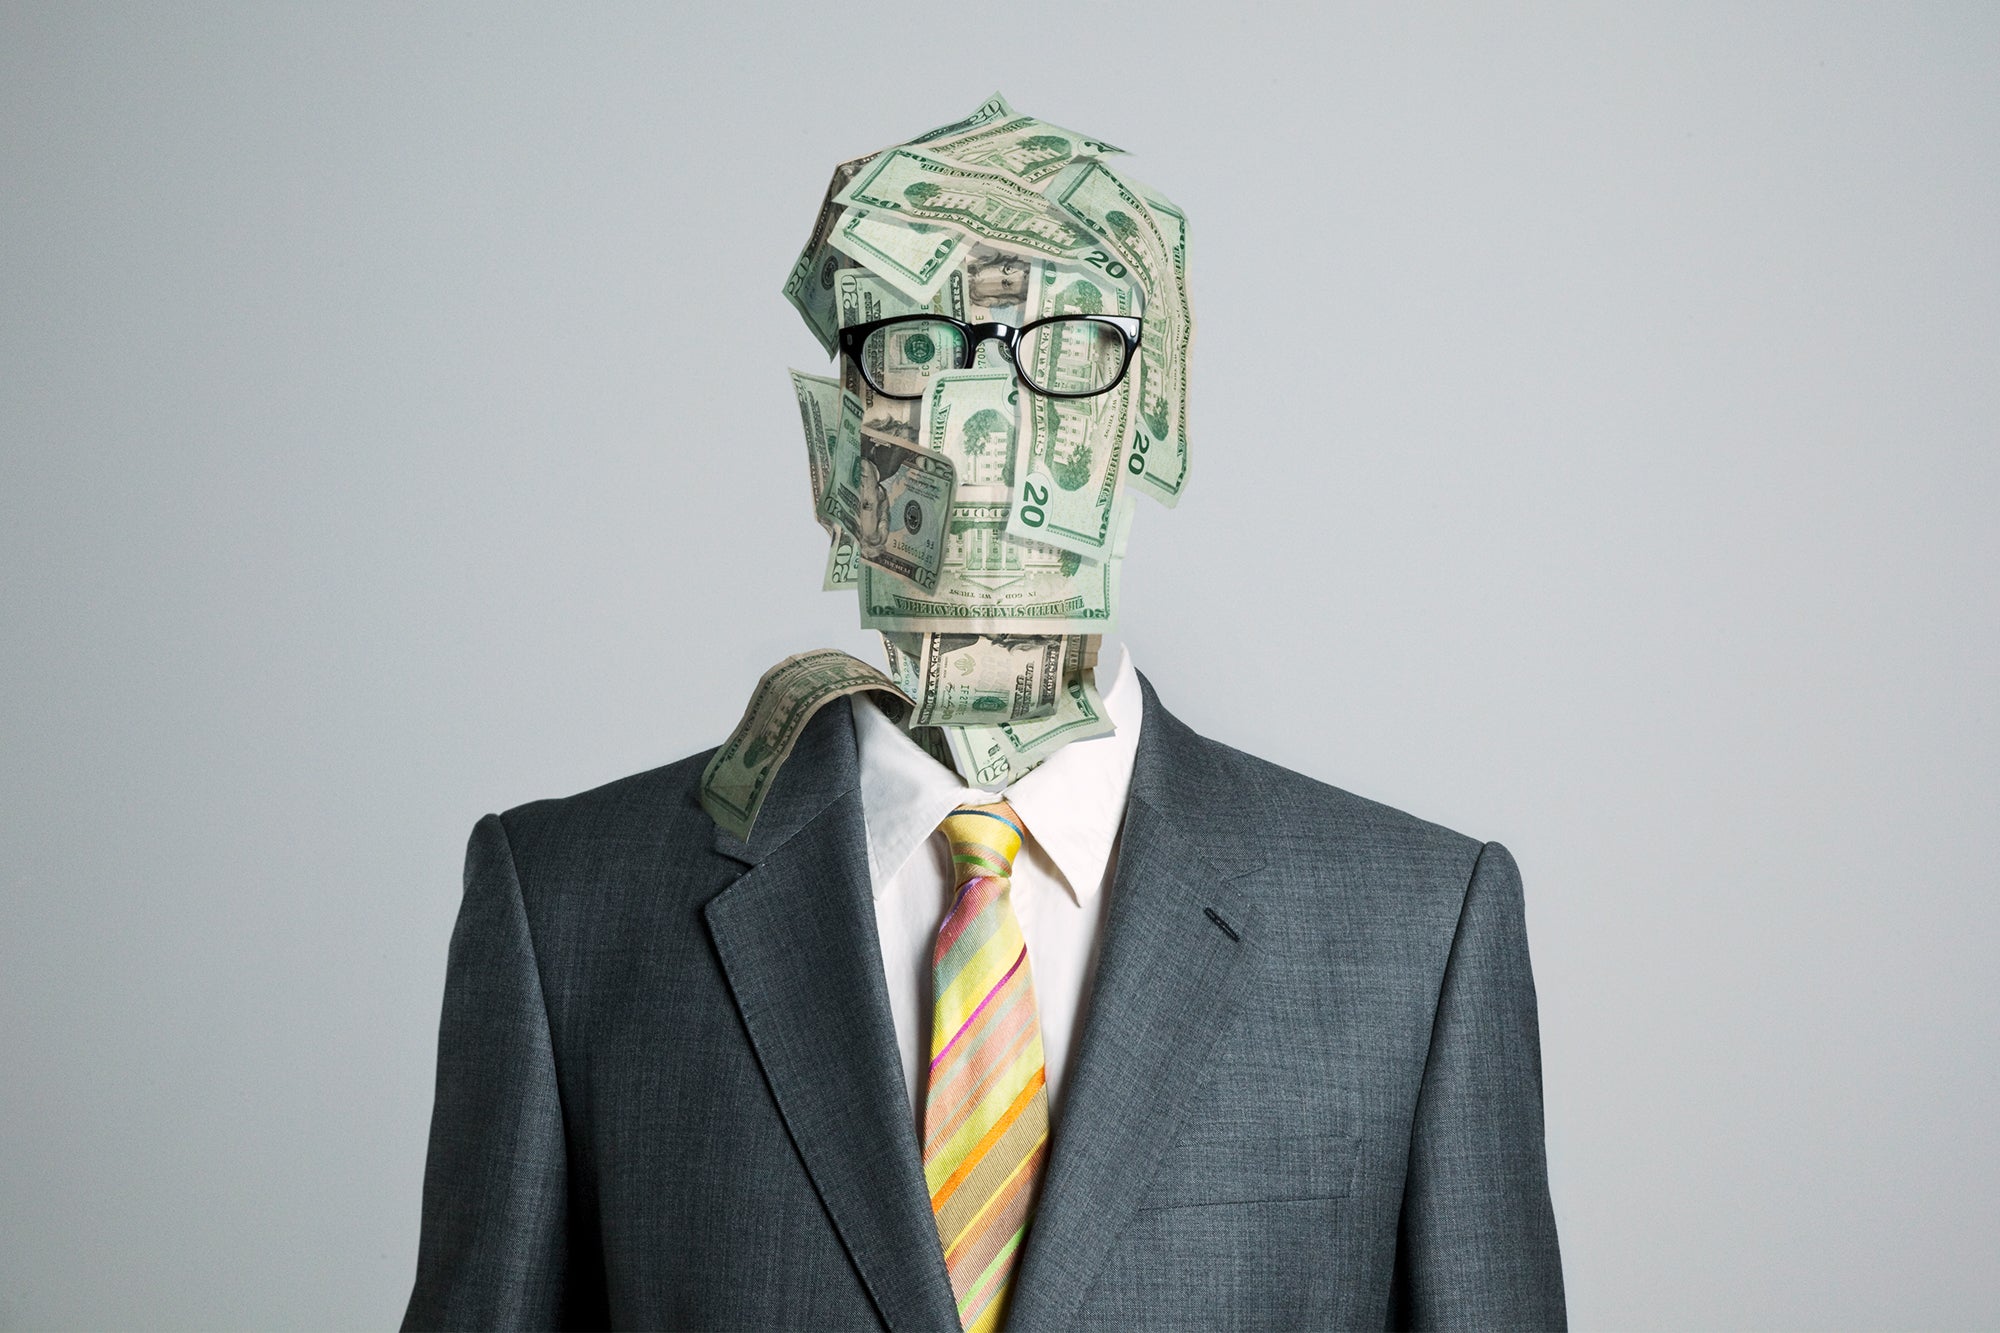 Photo composite illustration, man made of money wearing glasses and a business suit on a gray background